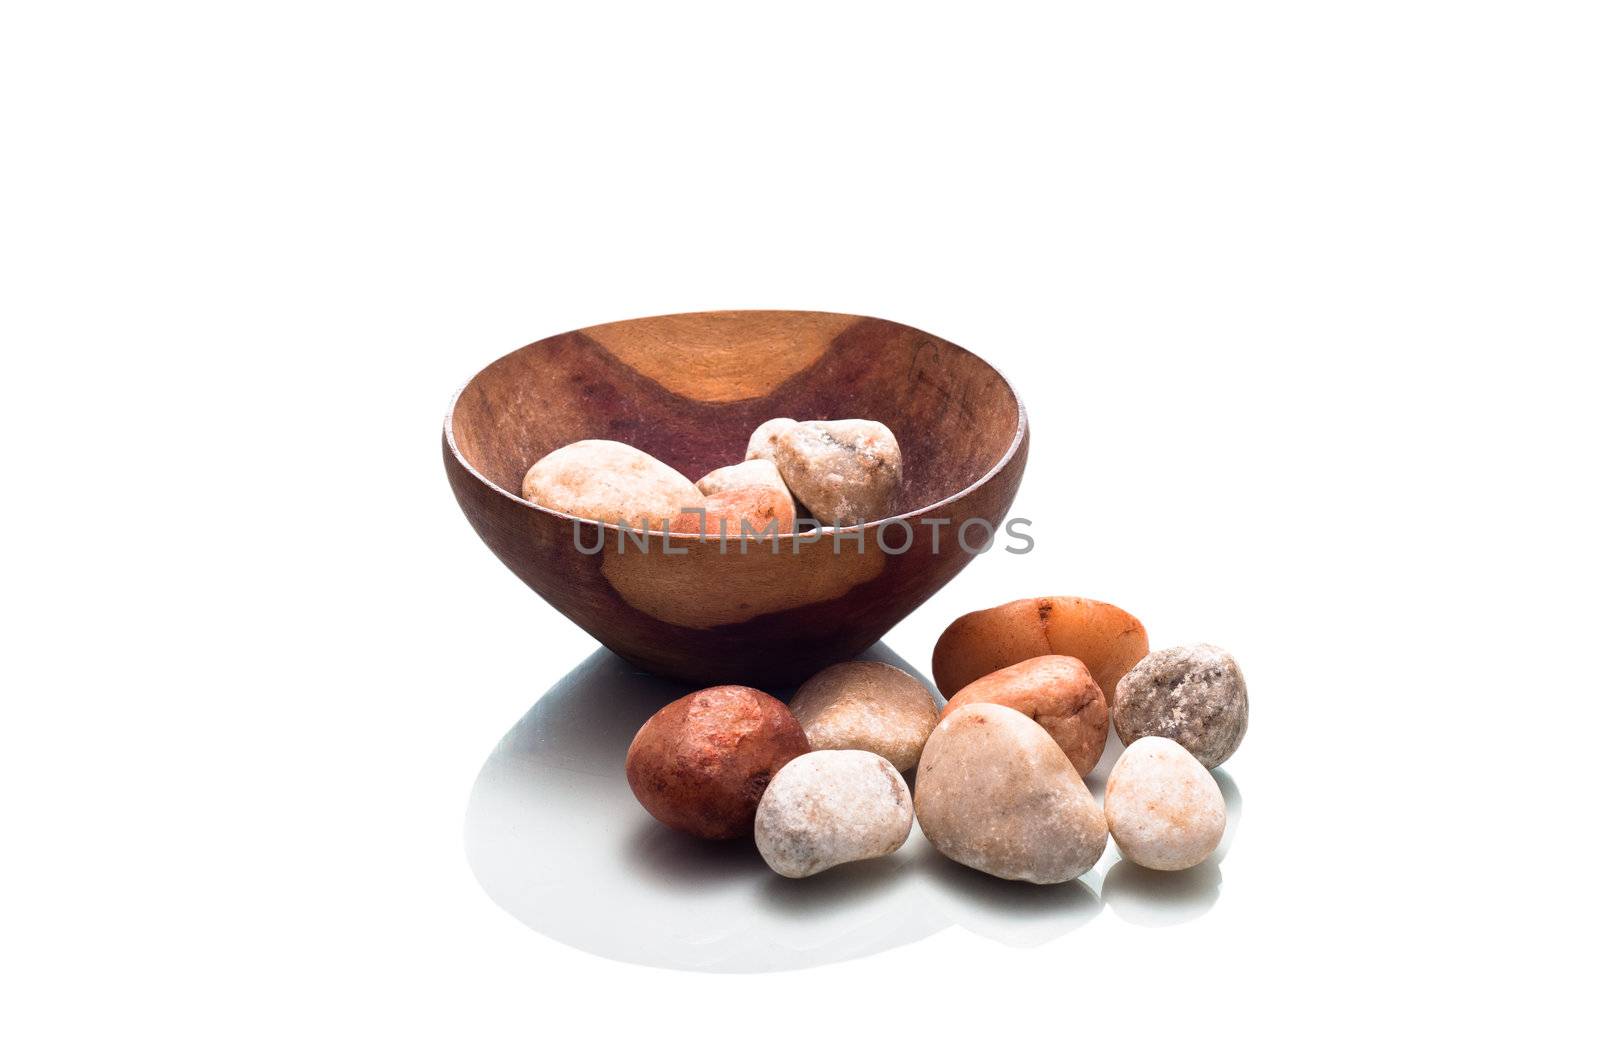 Small wooden bowl containing stones isolated on a white background